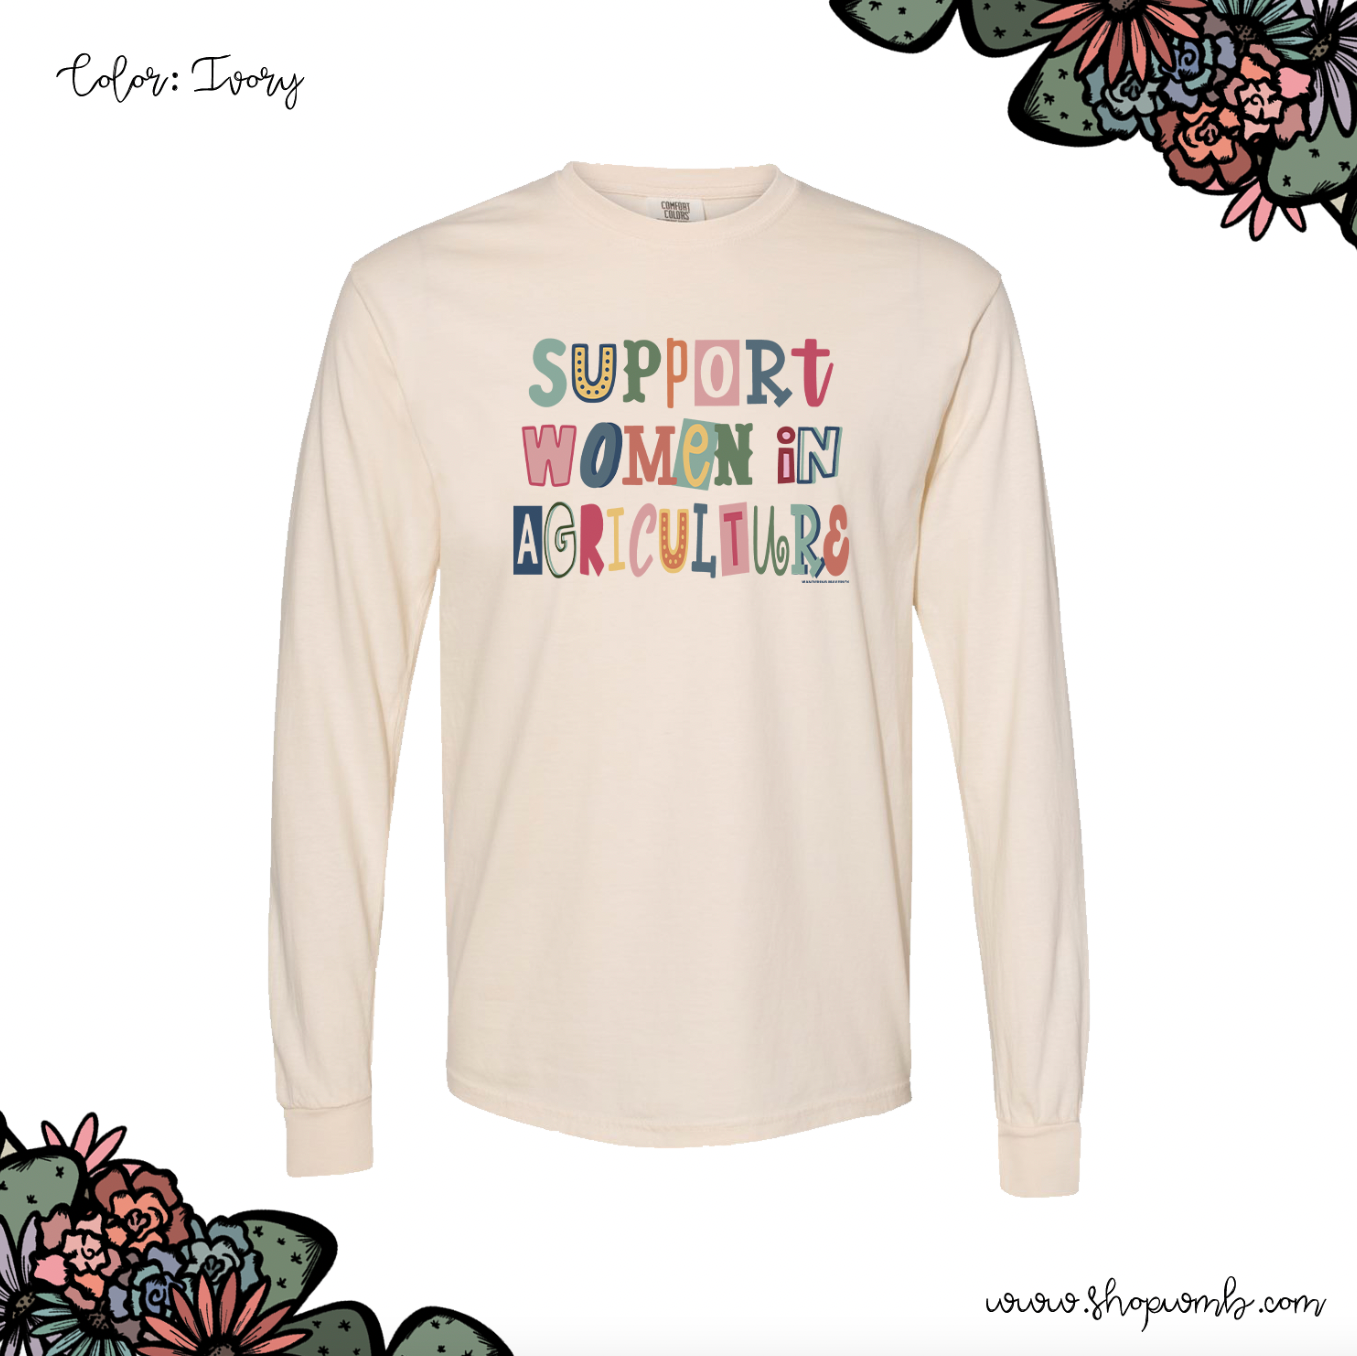 Magazine Support Women In Agriculture LONG SLEEVE T-Shirt (S-3XL) - Multiple Colors!